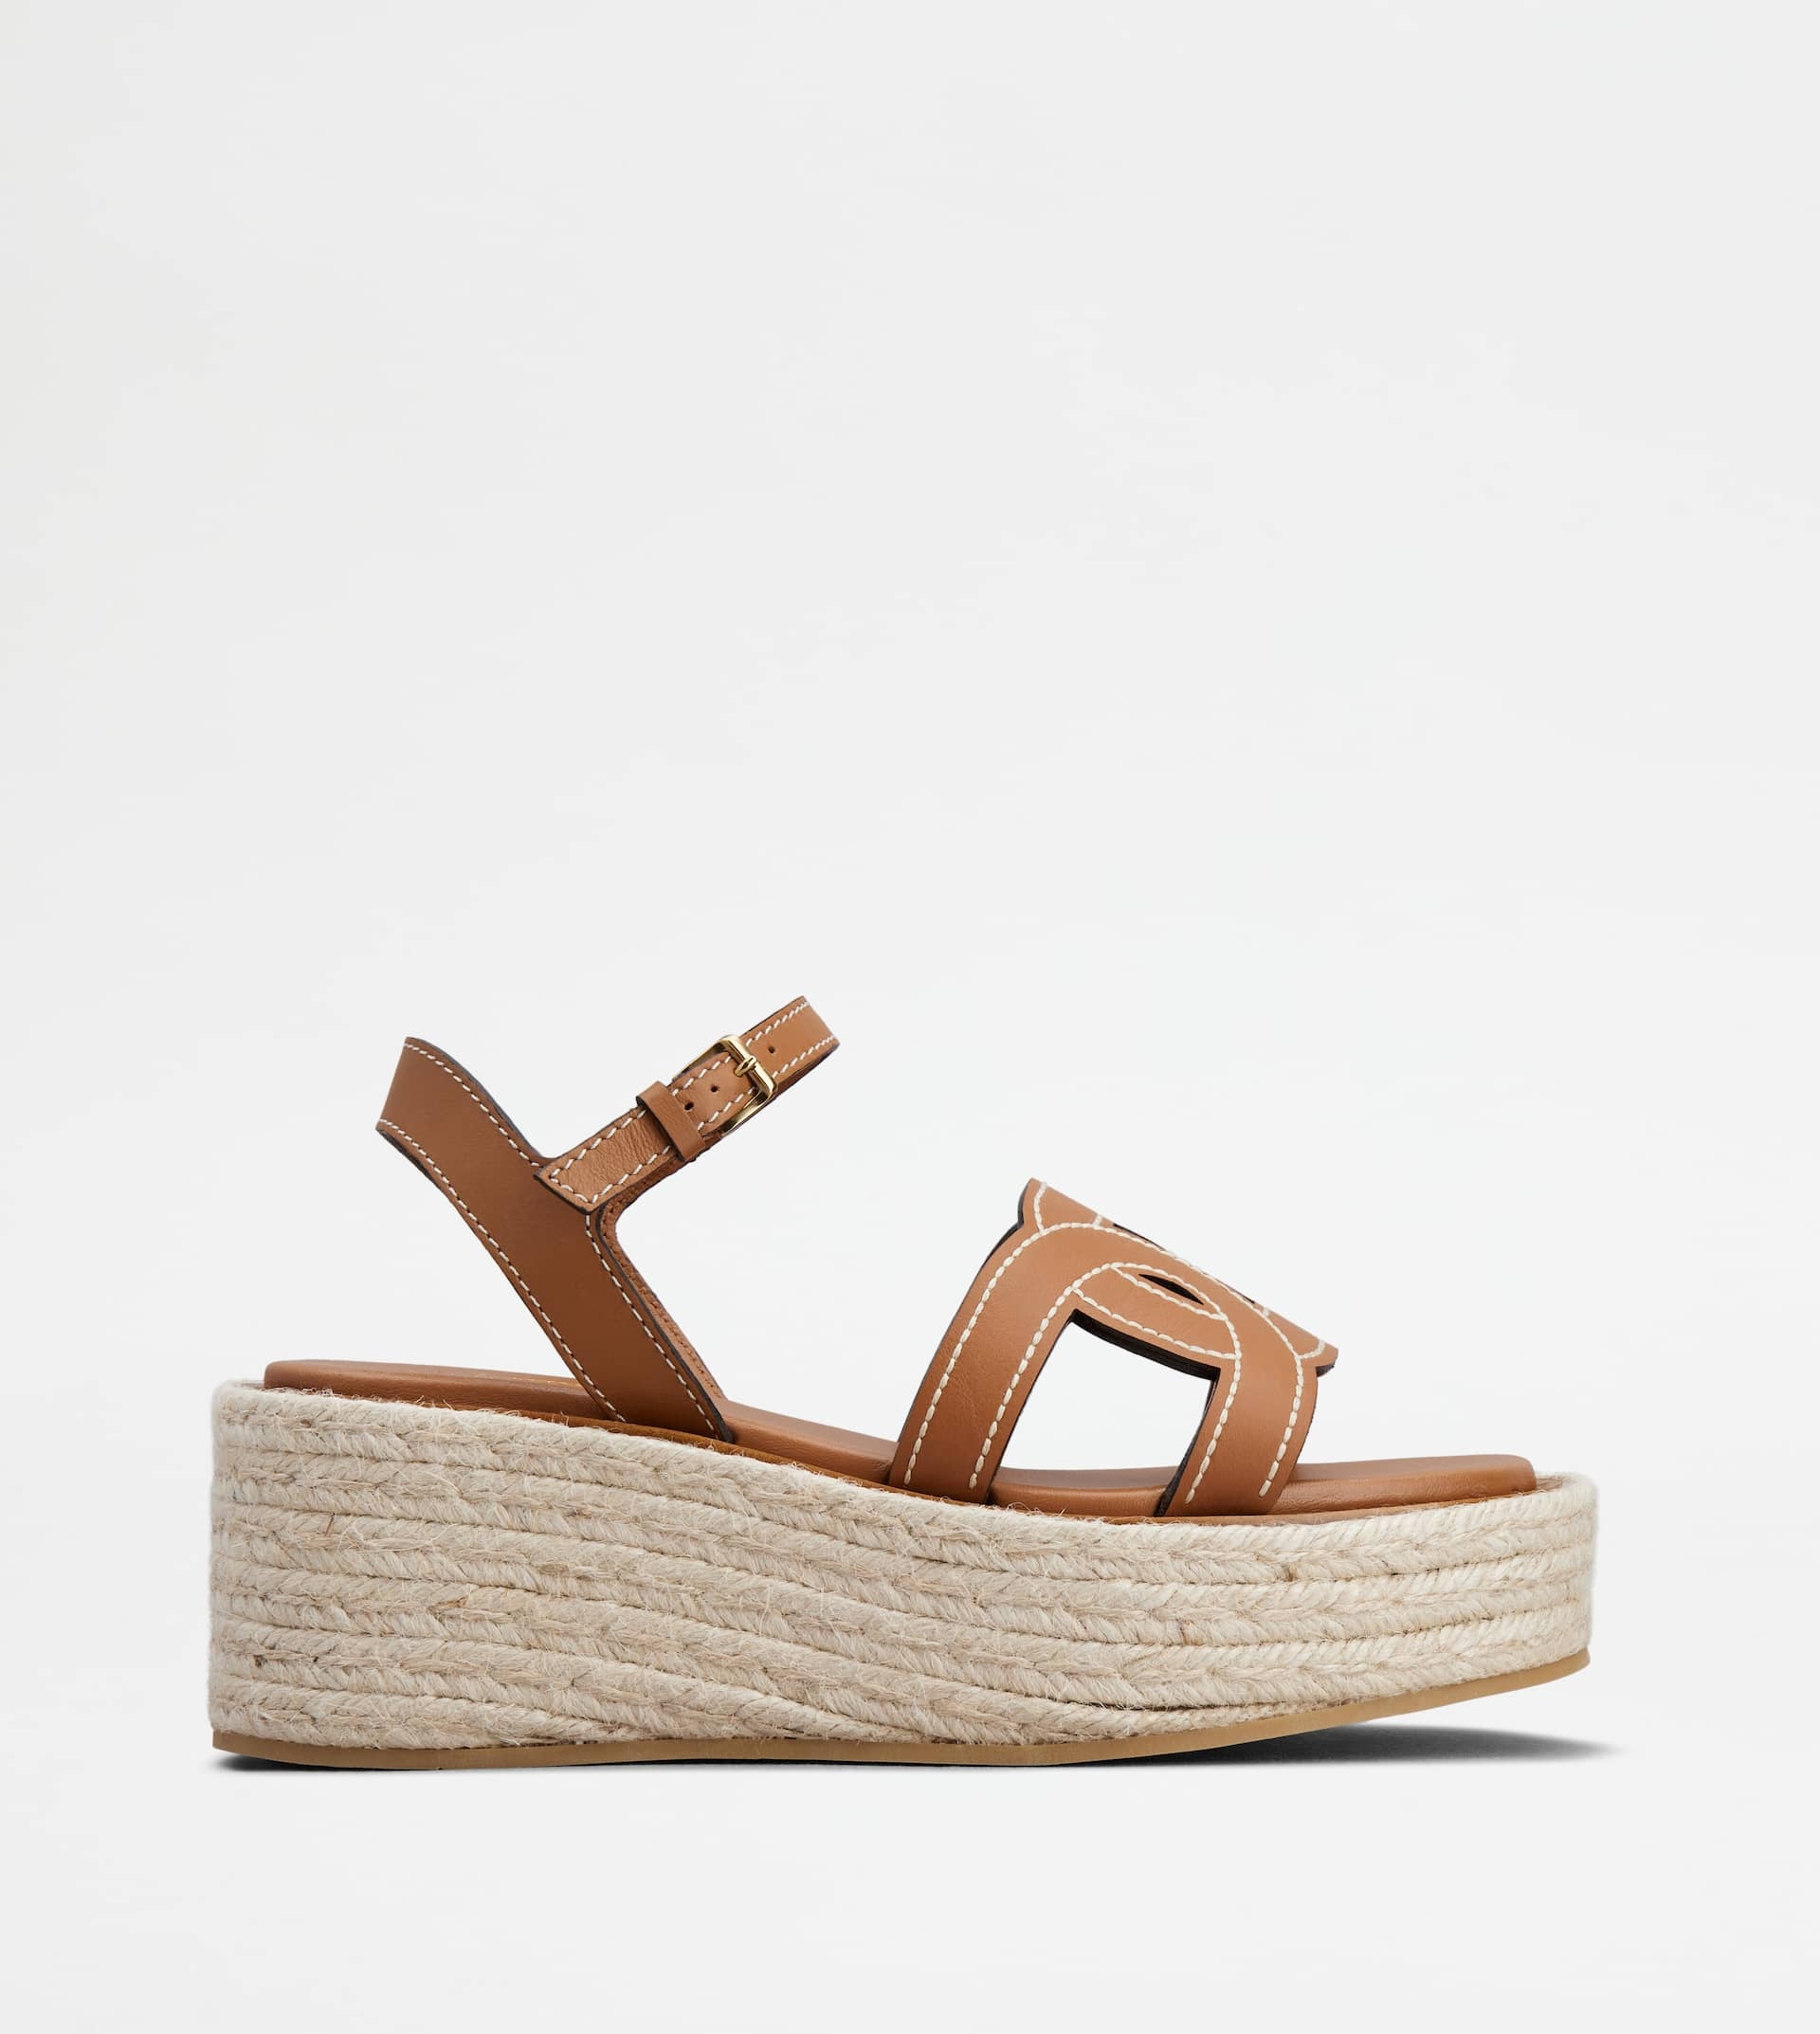 KATE WEDGE SANDALS IN LEATHER - BROWN - 1